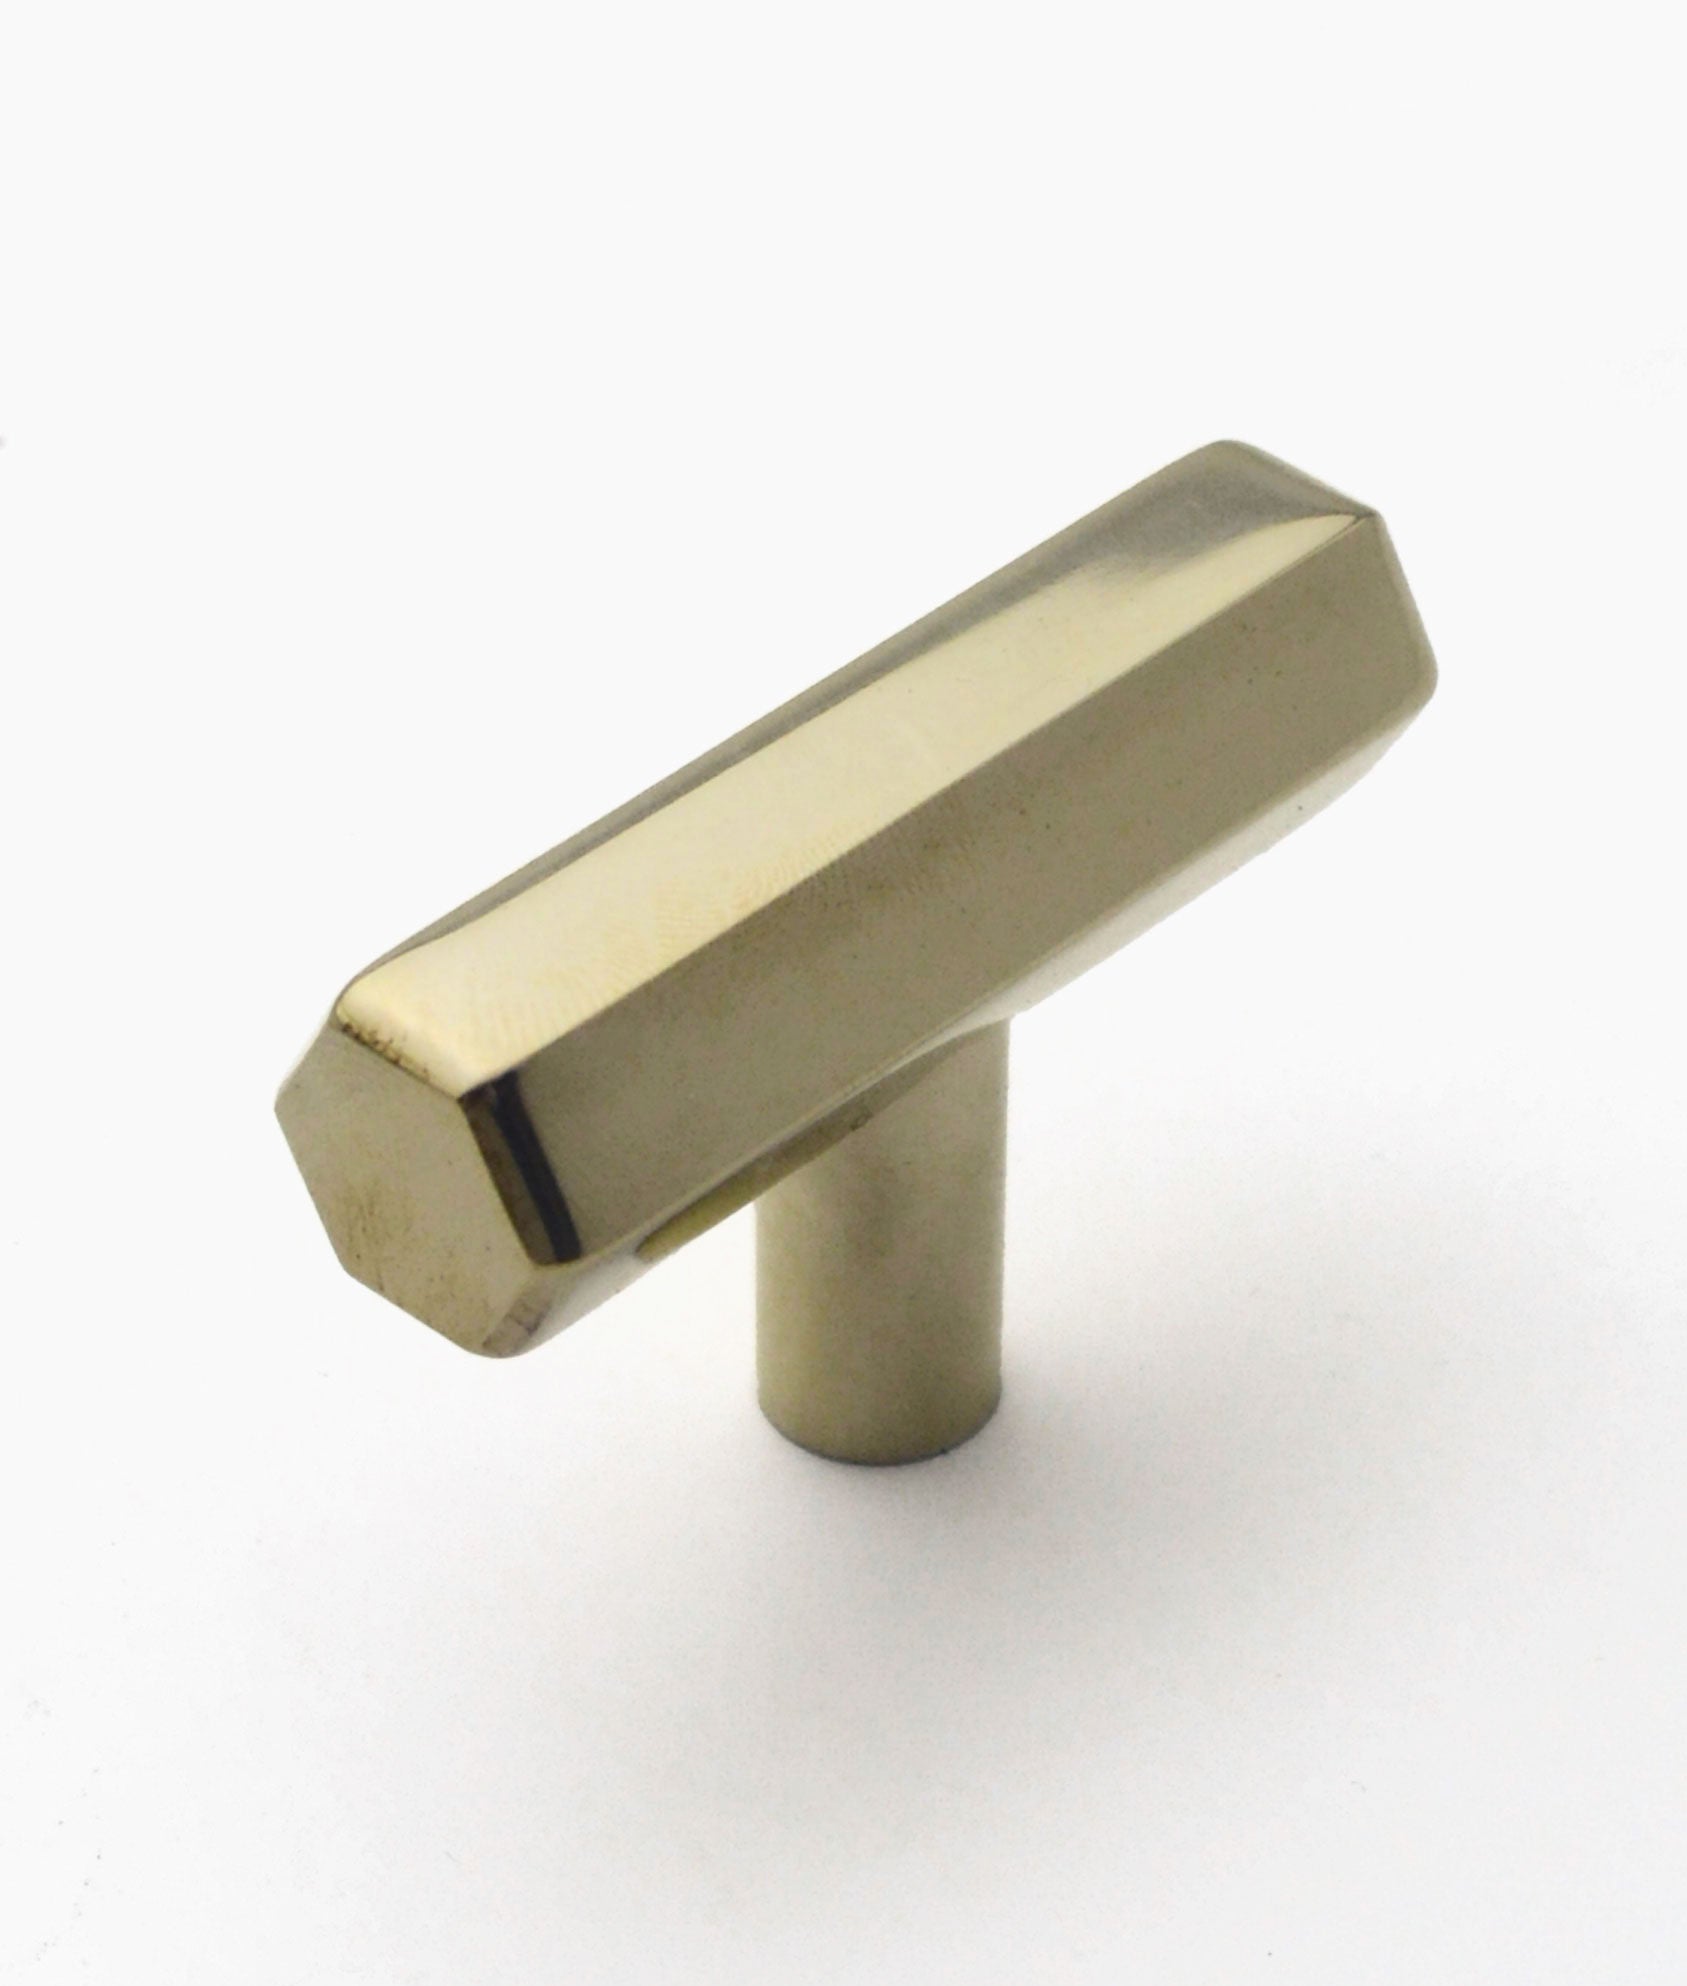 Unlacquered Polished Brass Sand Hexagonal T-Bar Cabinet Handle